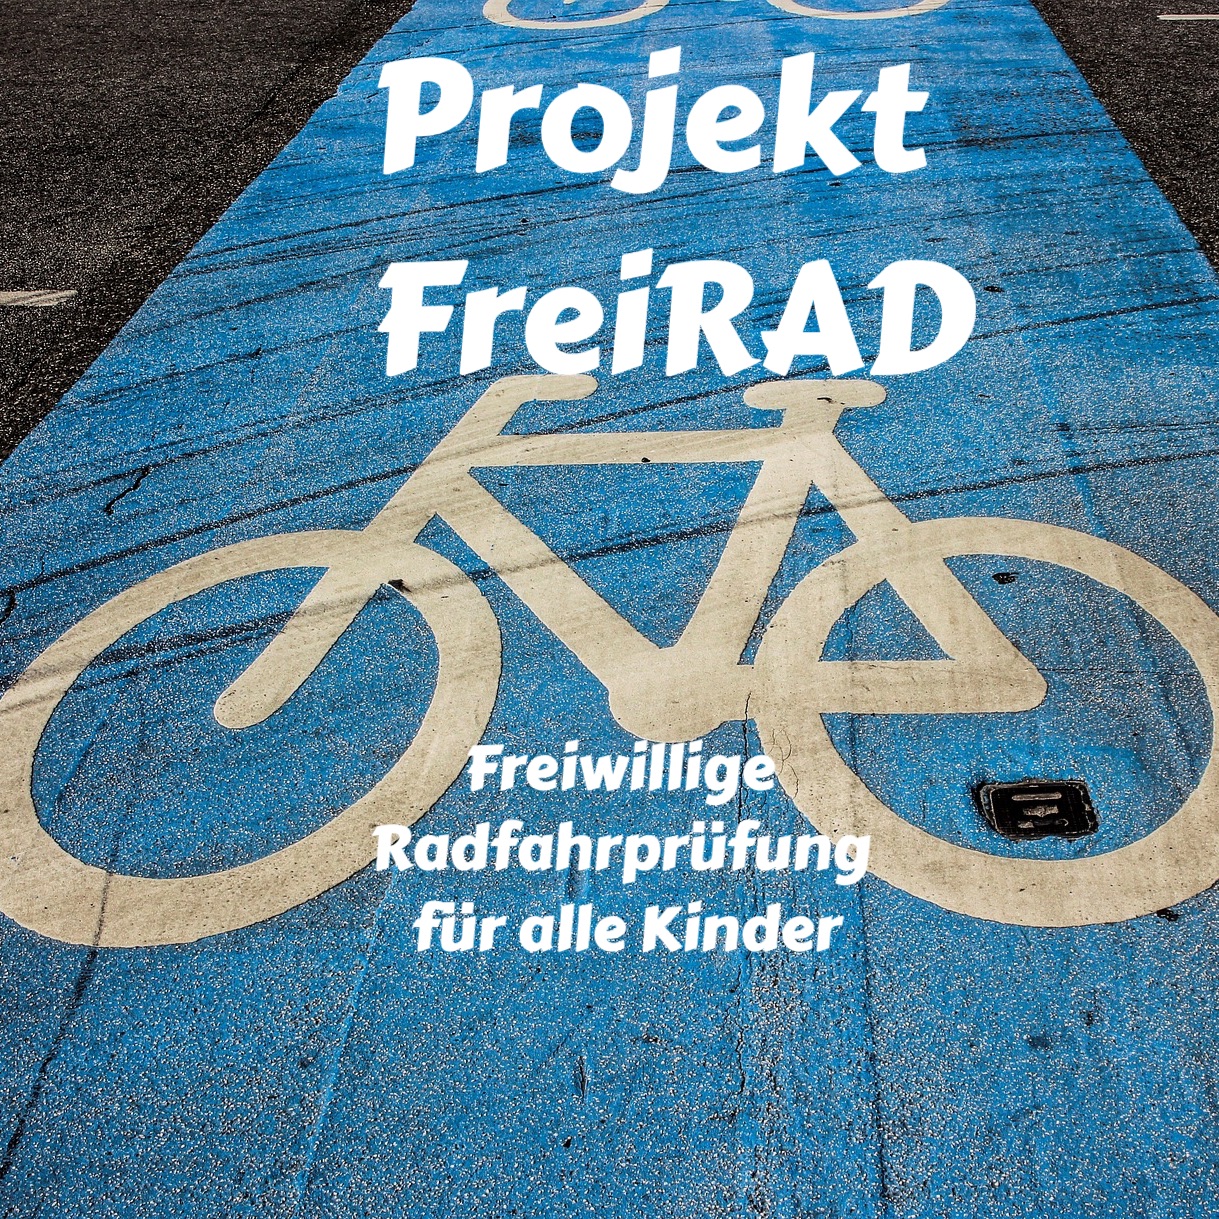 Read more about the article Projekt FreiRad